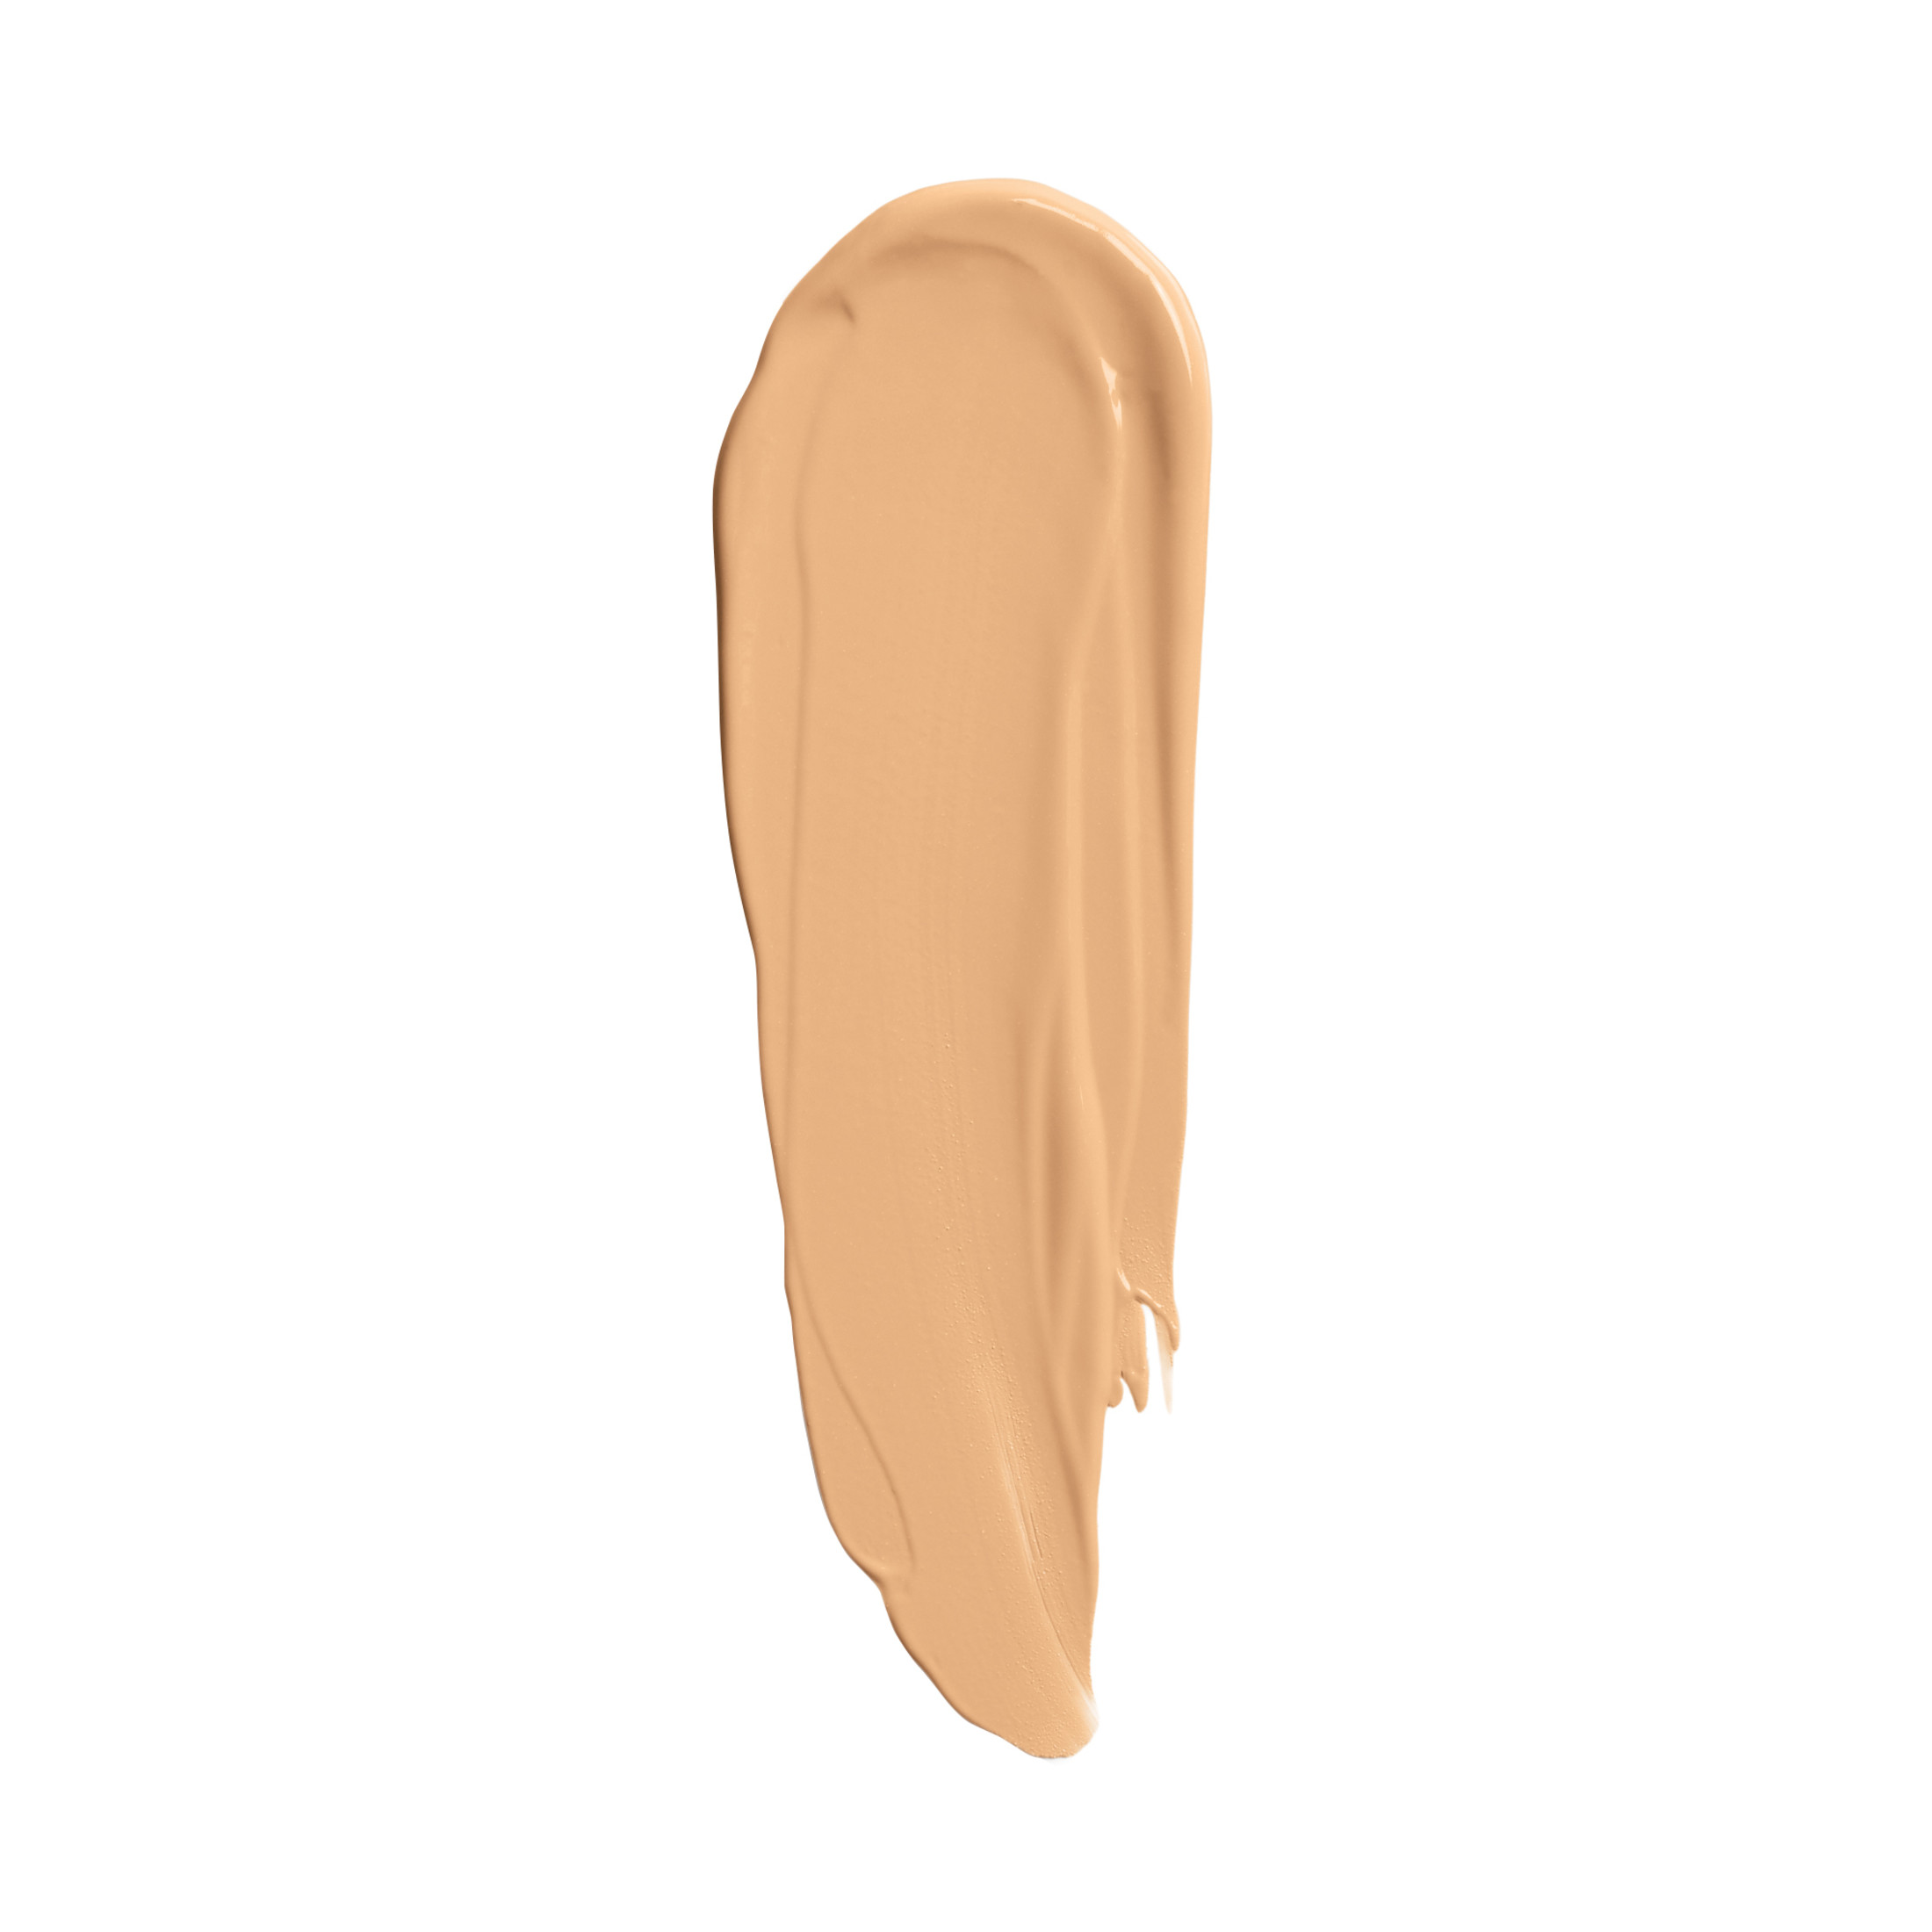 COVERGIRL Outlast All-Day Stay Fabulous 3-in-1 Foundation, 810 Classic Ivory, 1 oz - image 3 of 11